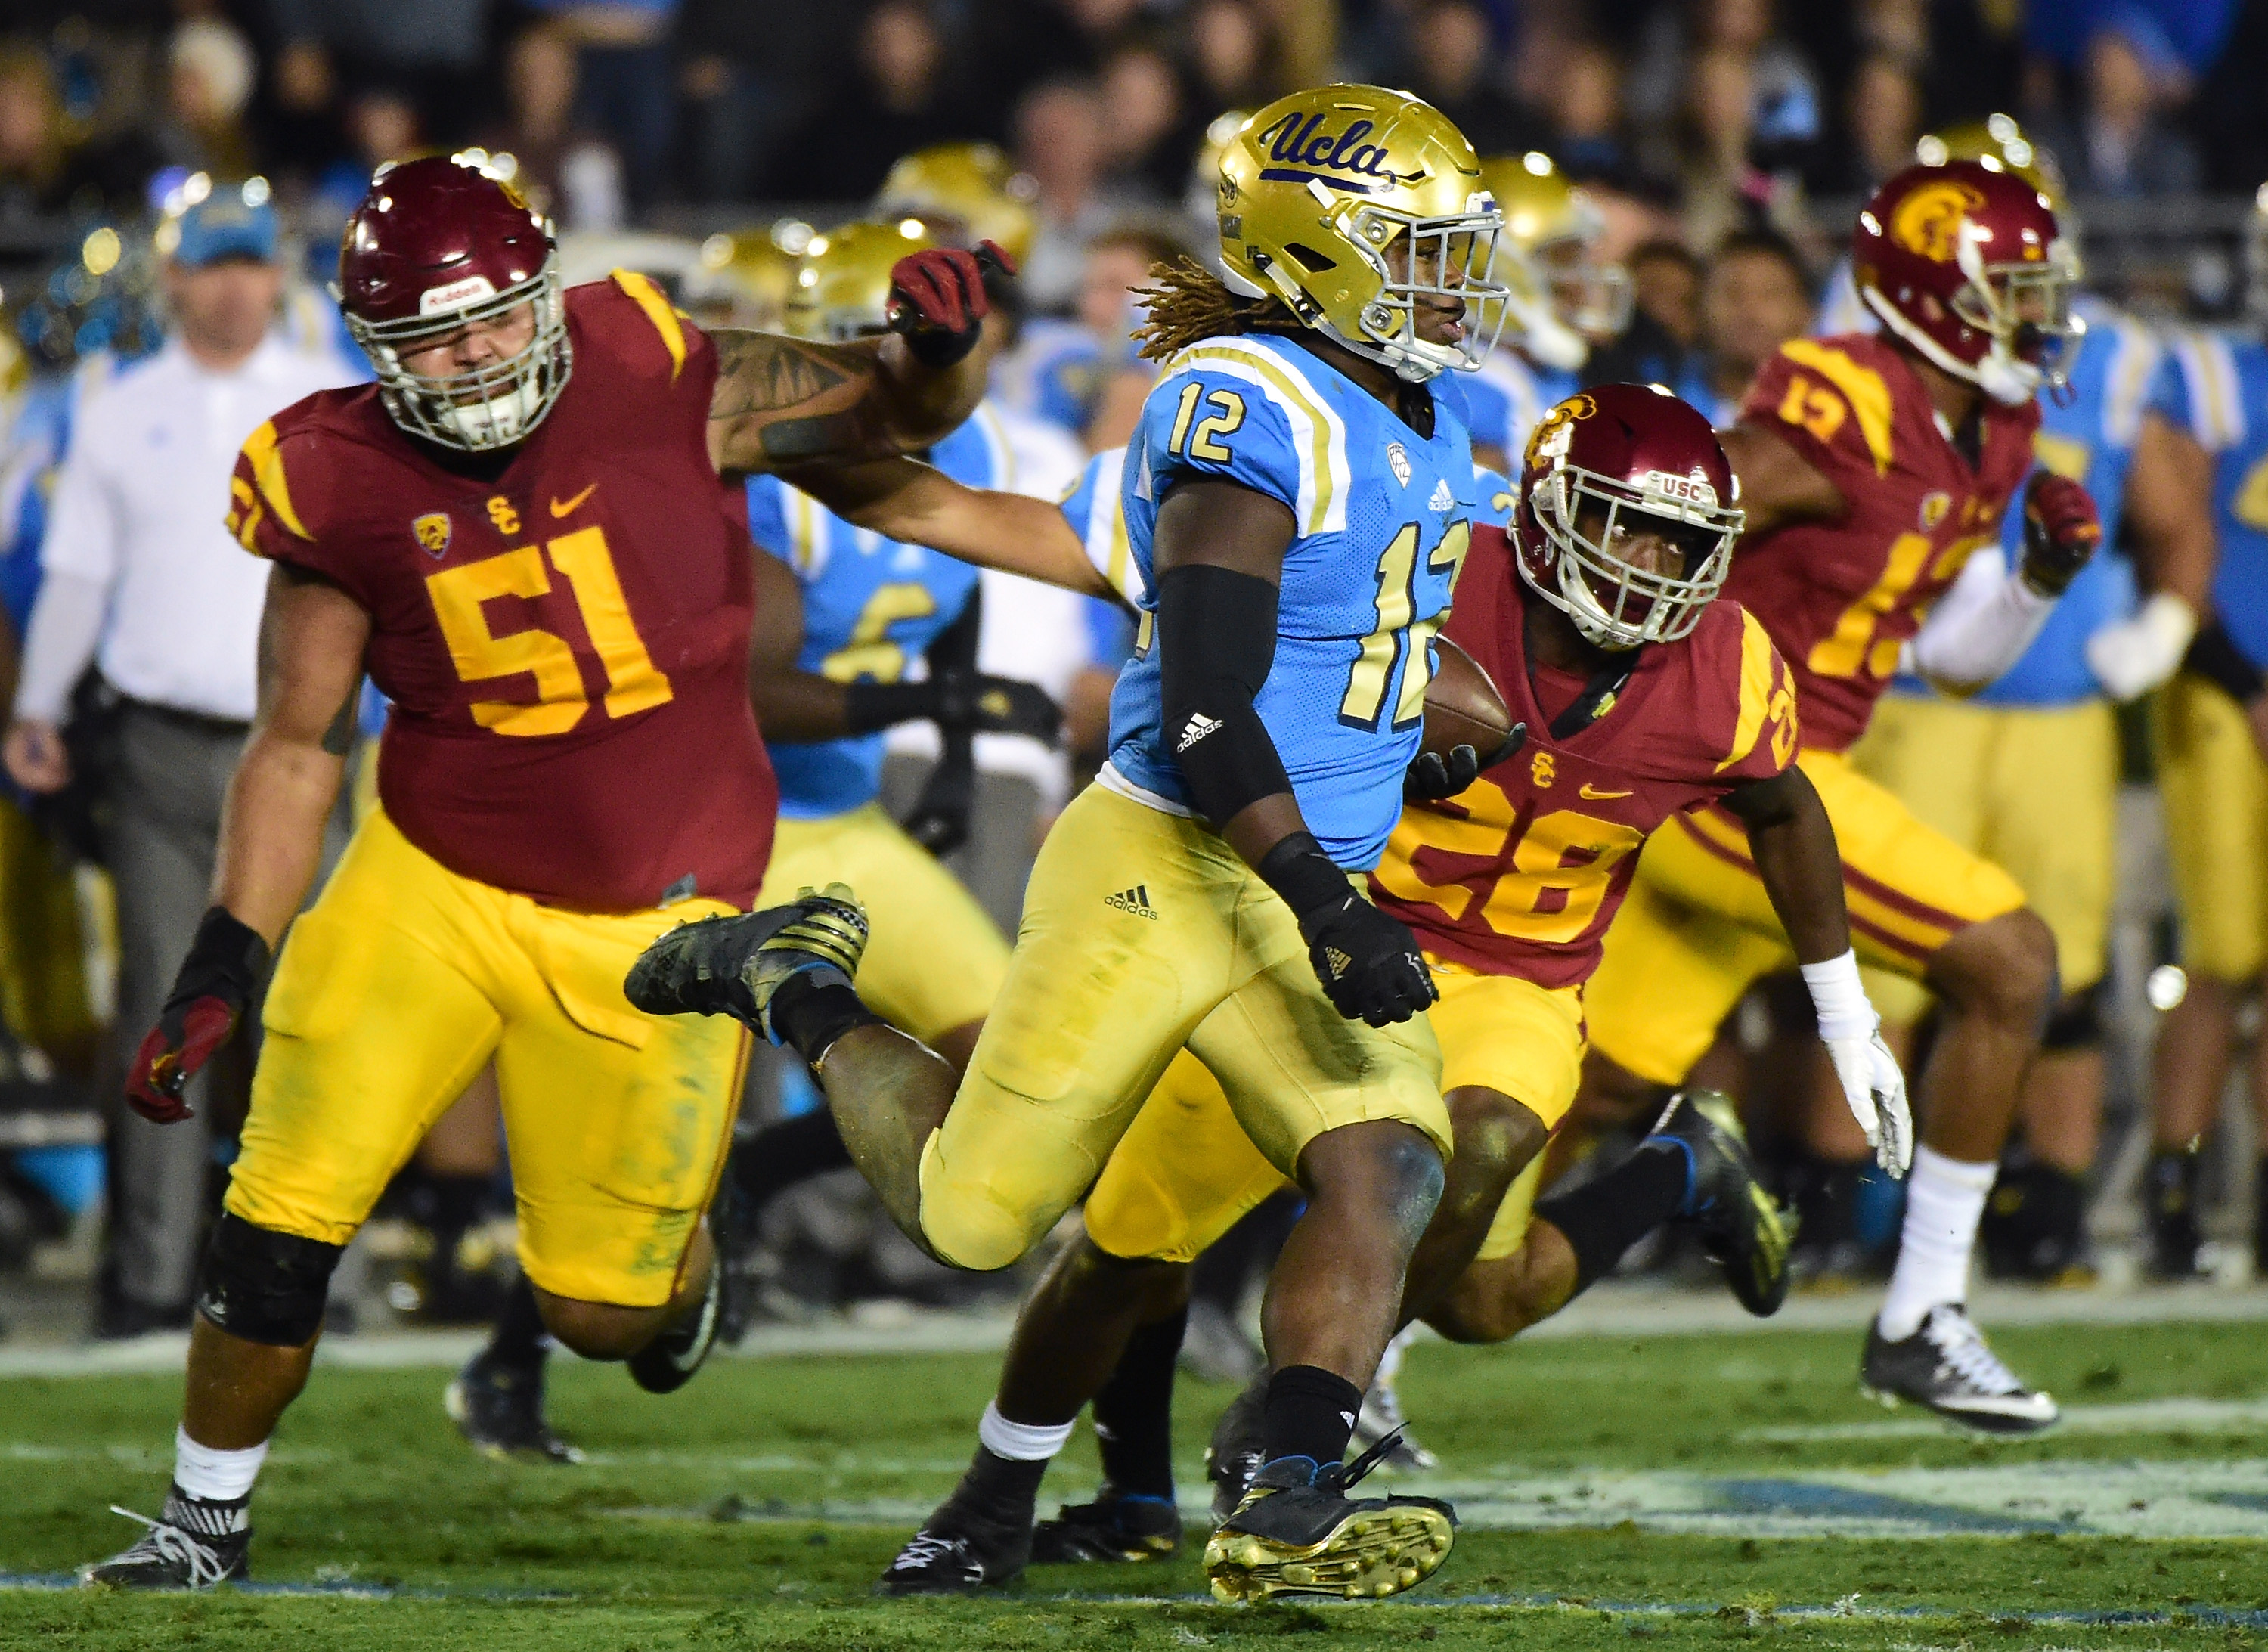 Go Joe Bruin interviews the author of 'UCLA vs. USC A Rivalry of Hate'